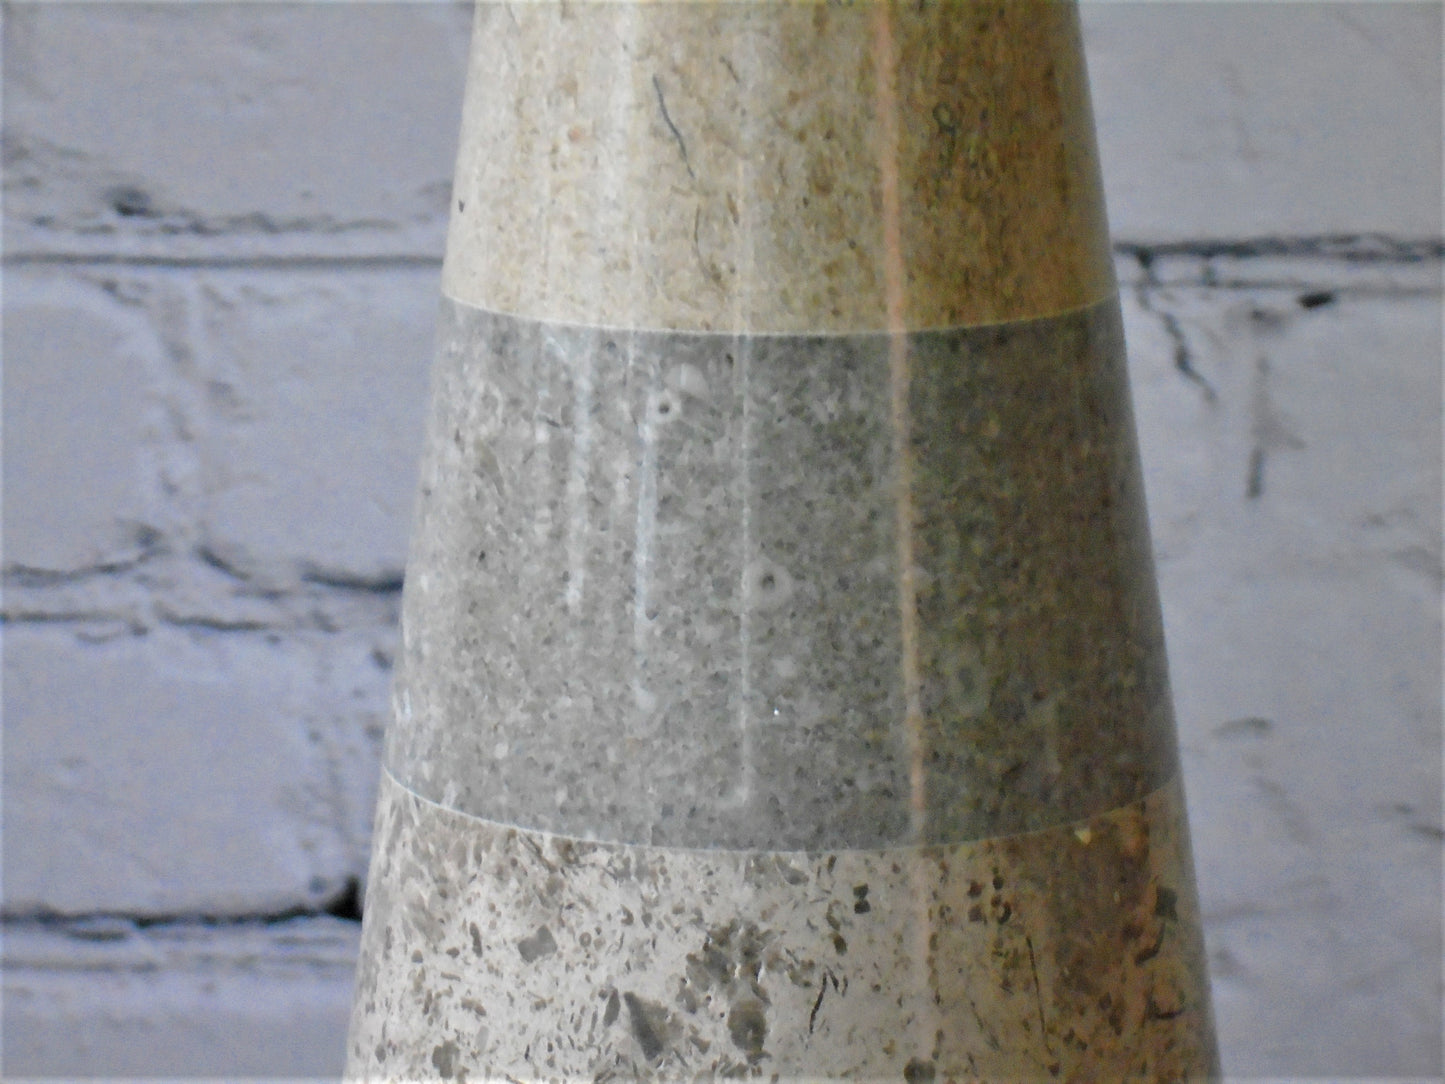 A conical Lamp Base turned from a selection of English Stones